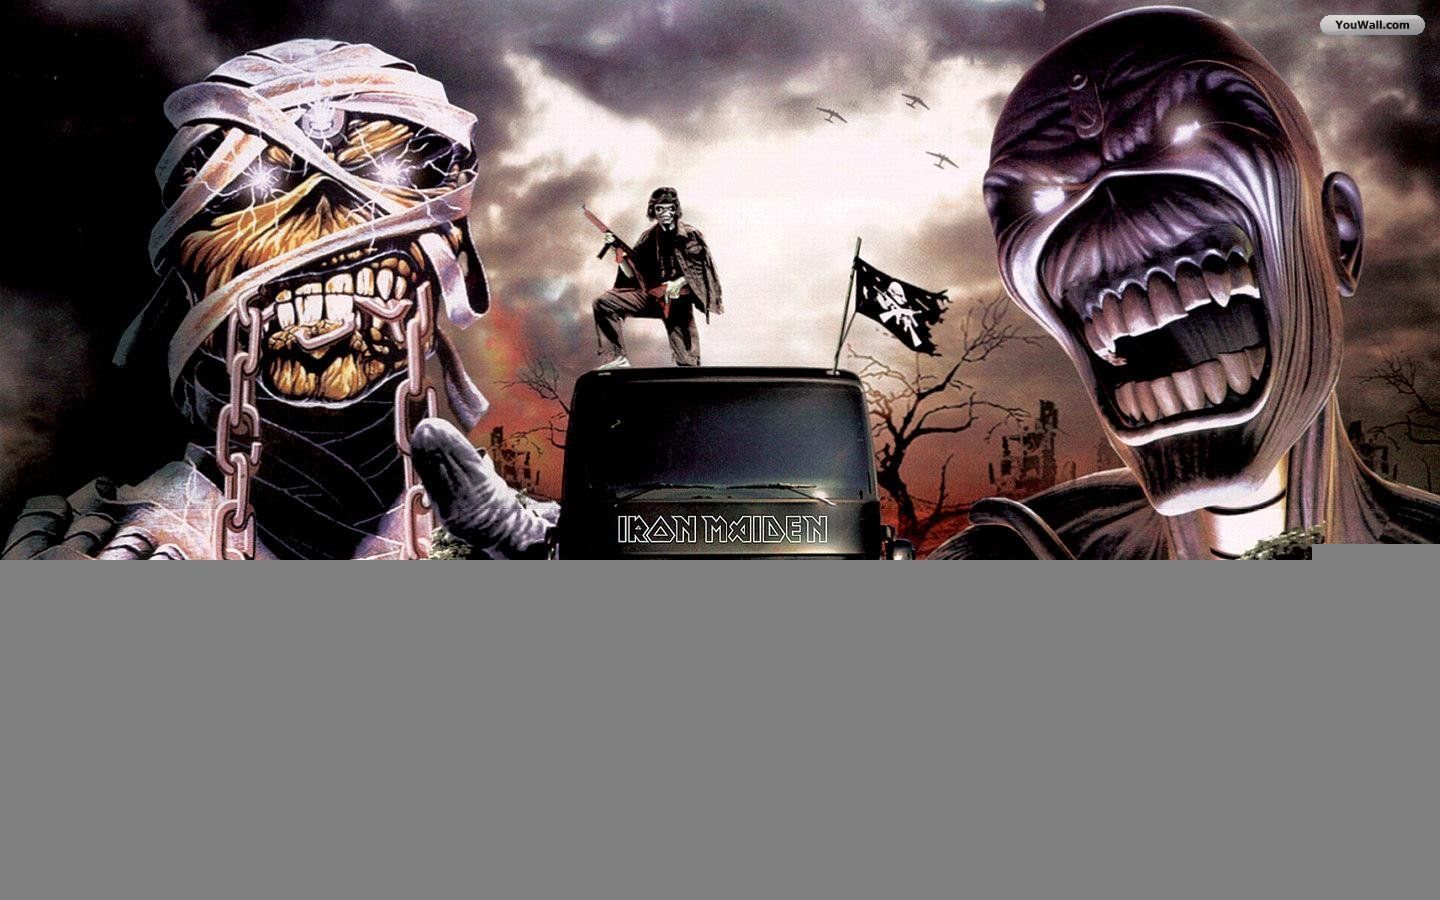 YouWall - Iron Maiden - On The Road Wallpaper - wallpaper